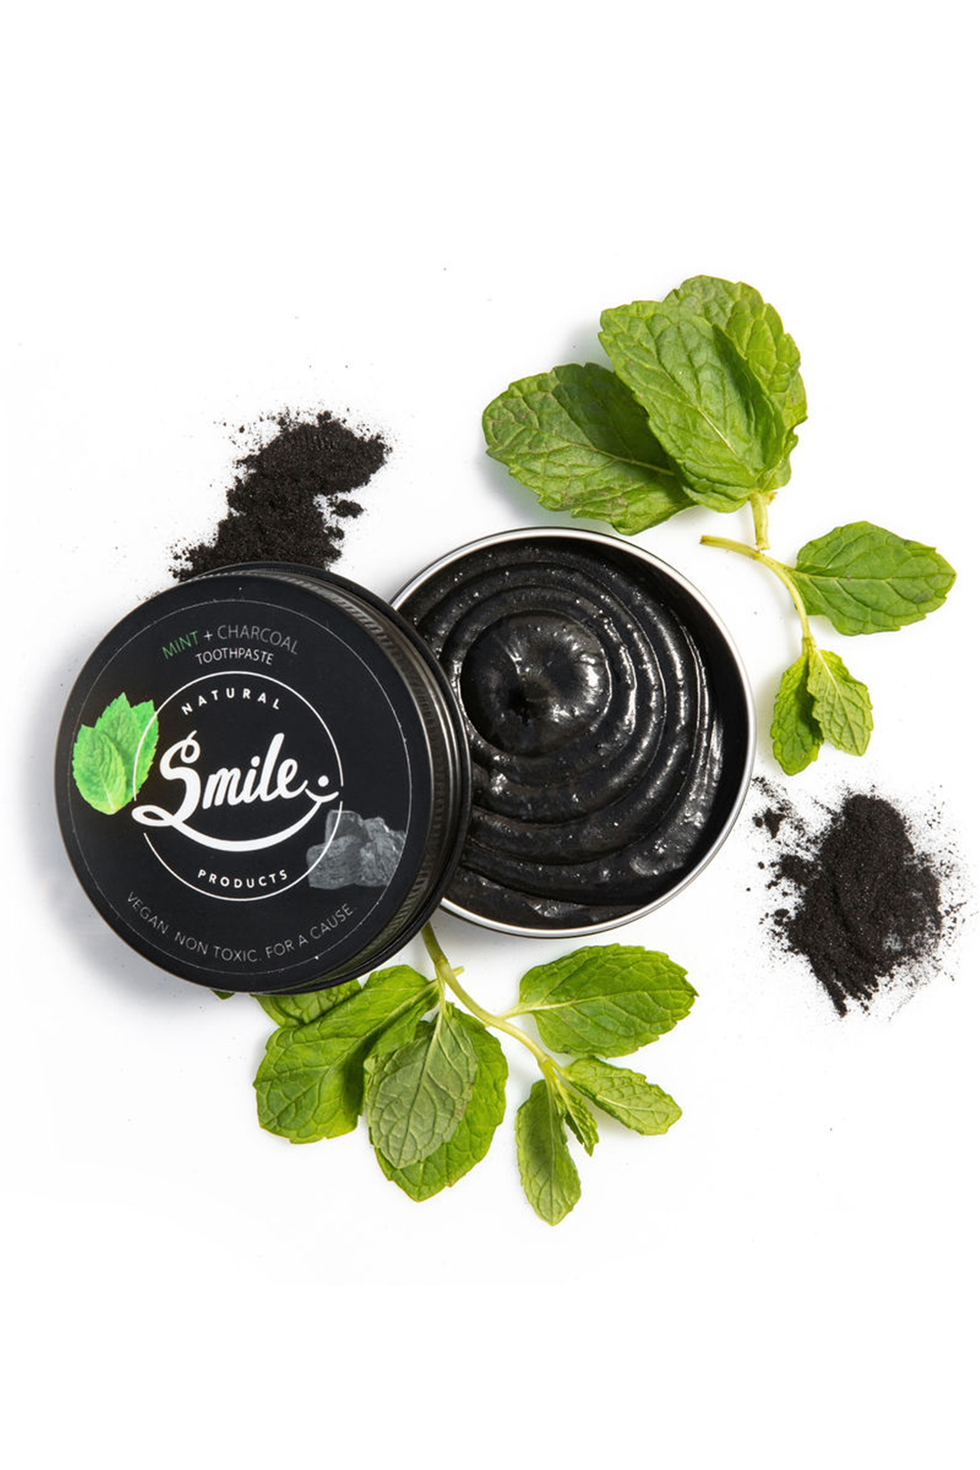 Smile Natural Products Mint + Charcoal Toothpaste